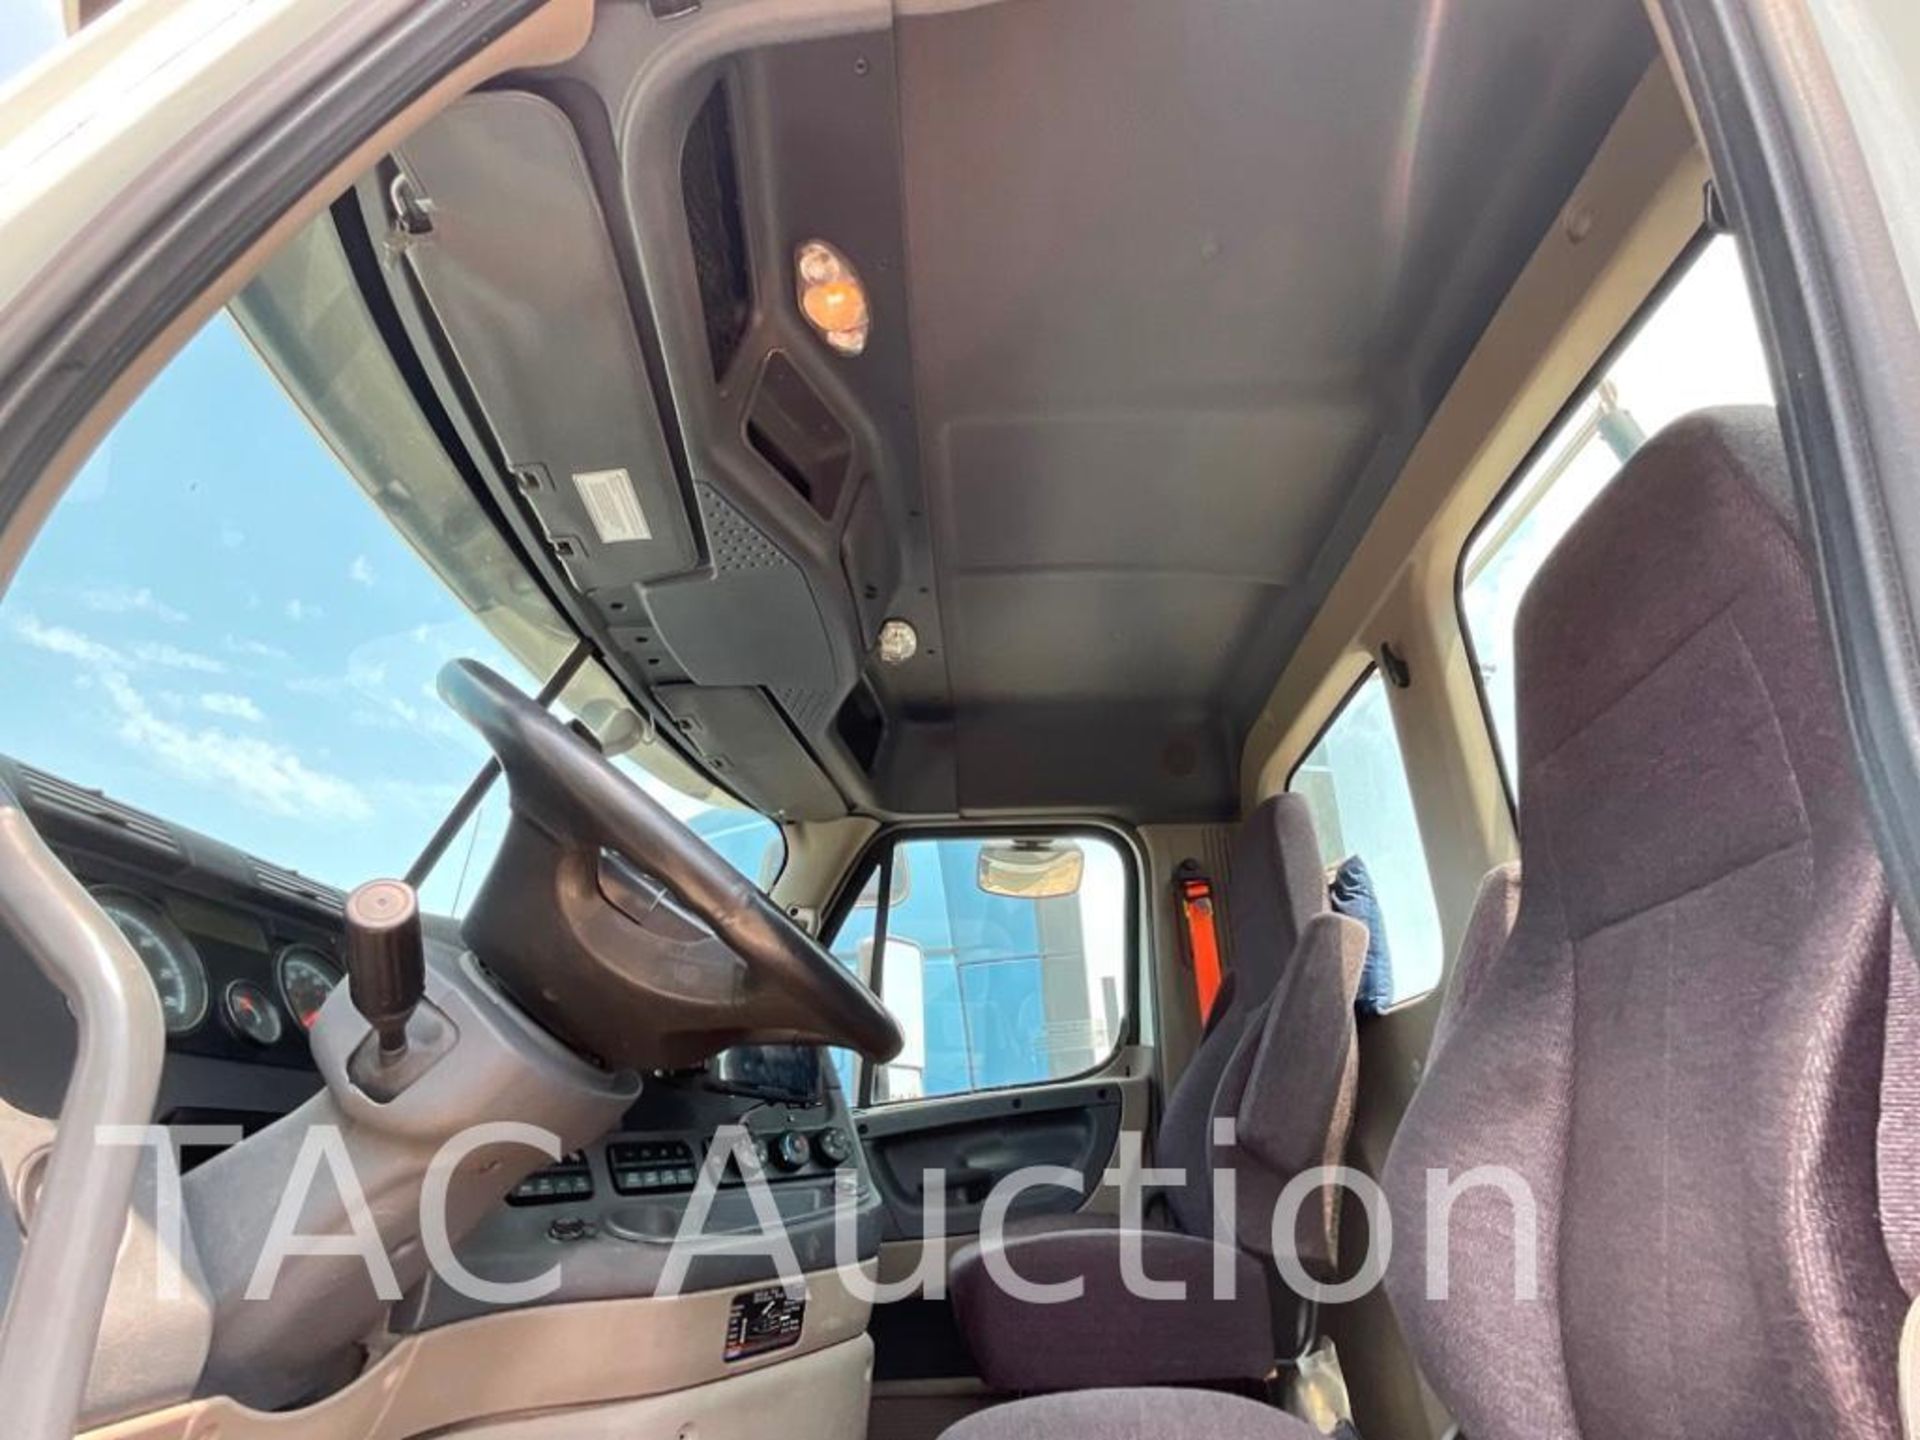 2020 Freightliner Cascadia Day Cab - Image 12 of 50